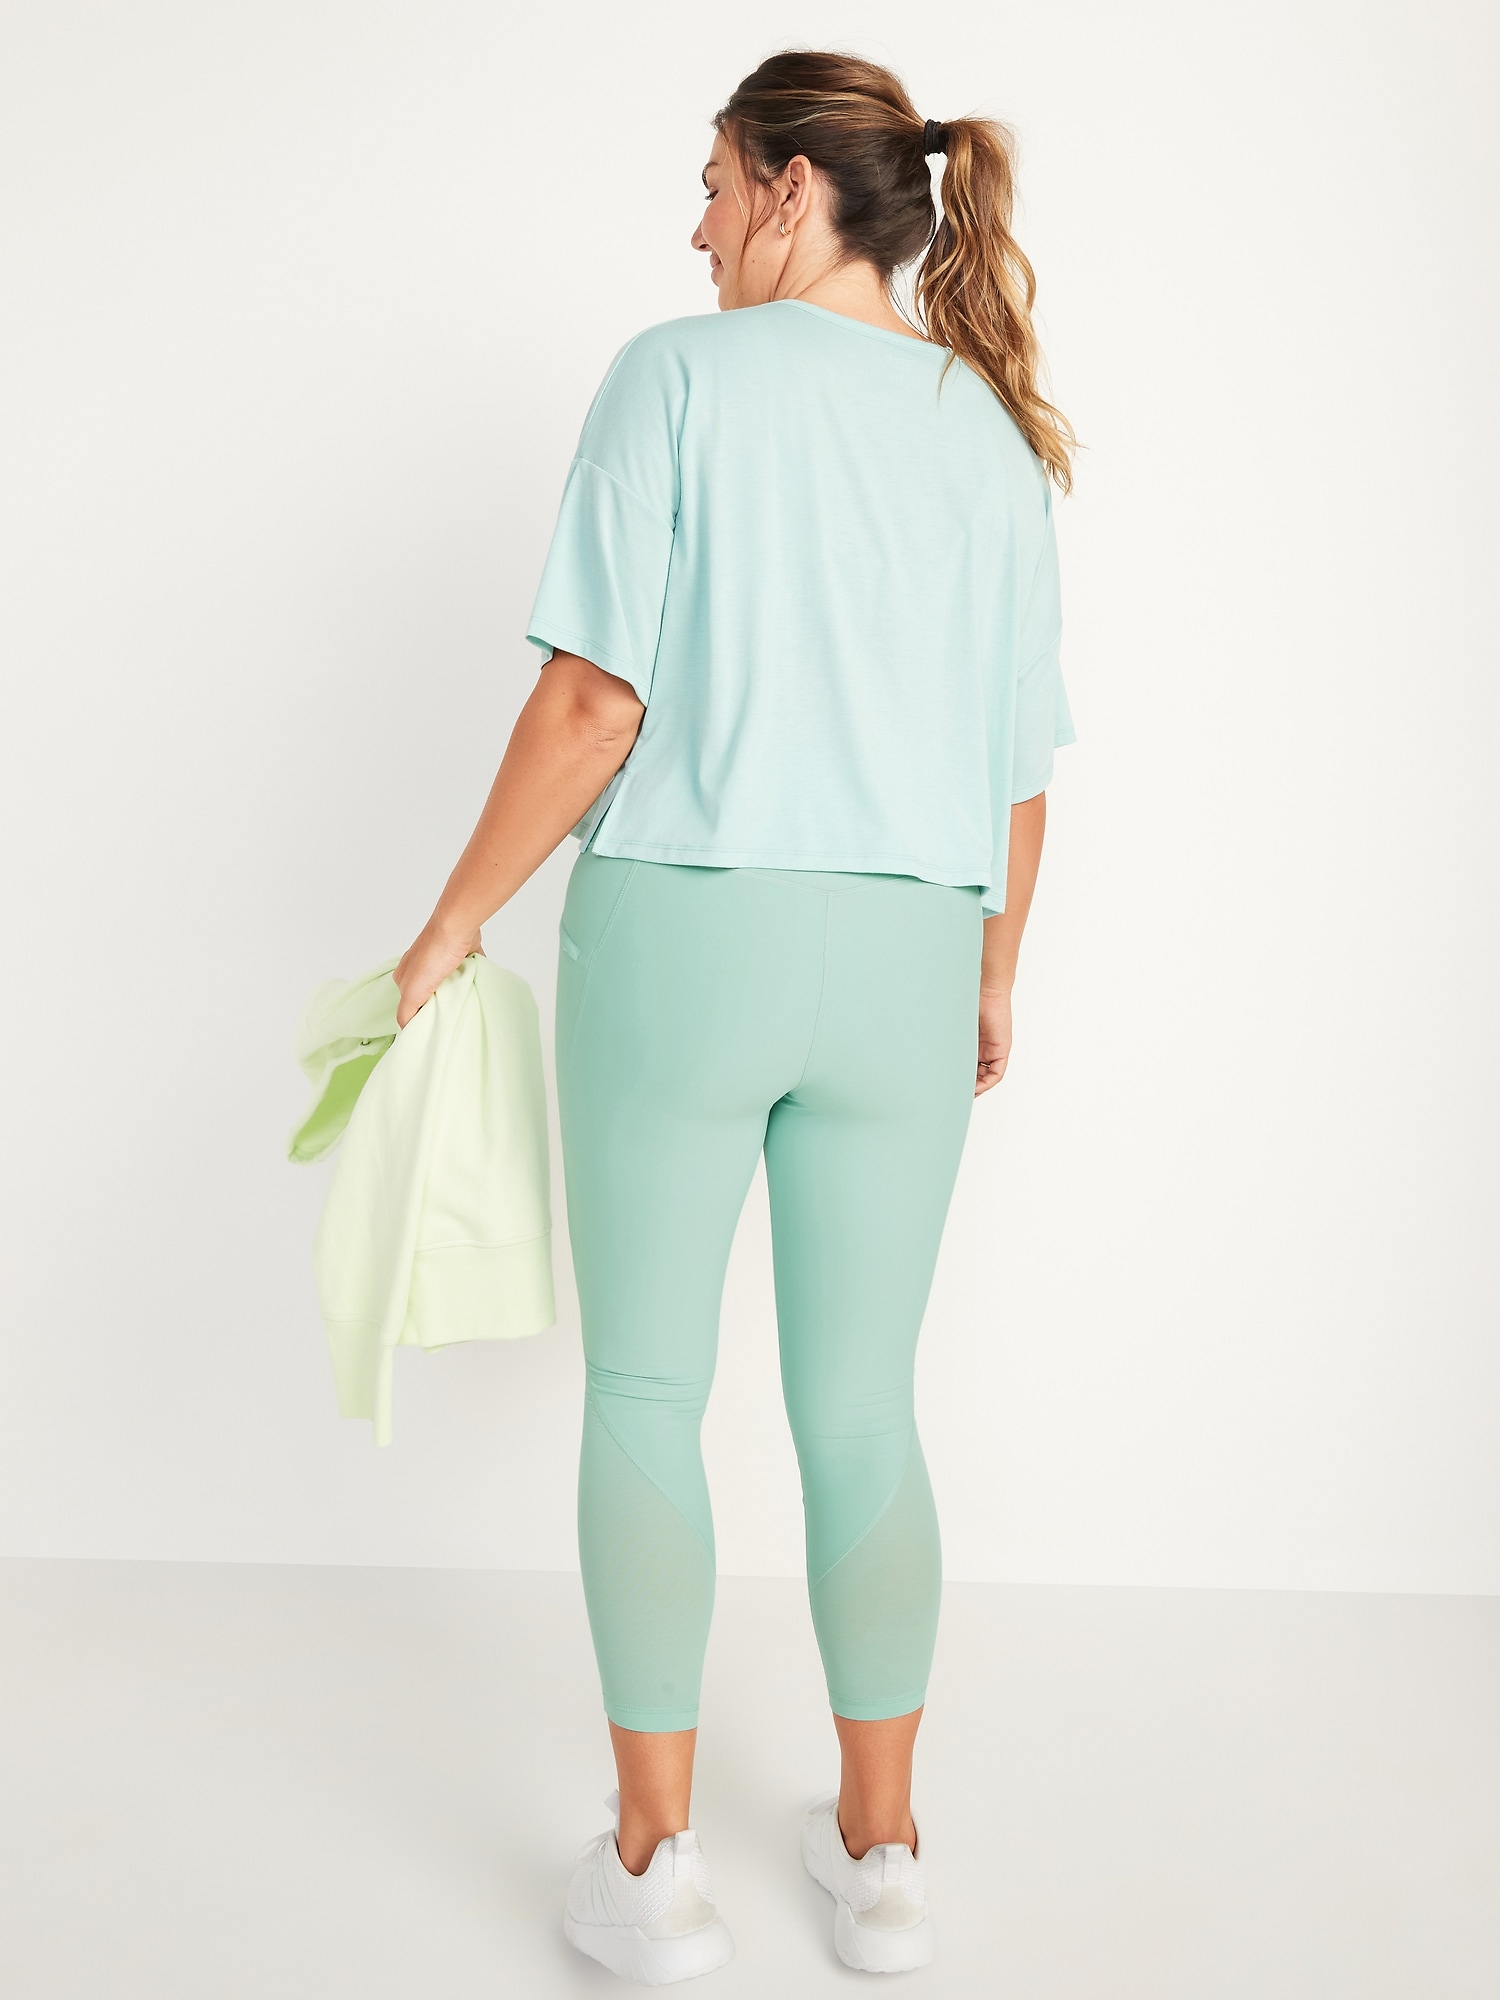 Old Navy High-Waisted PowerSoft Side-Pocket Crop Leggings for